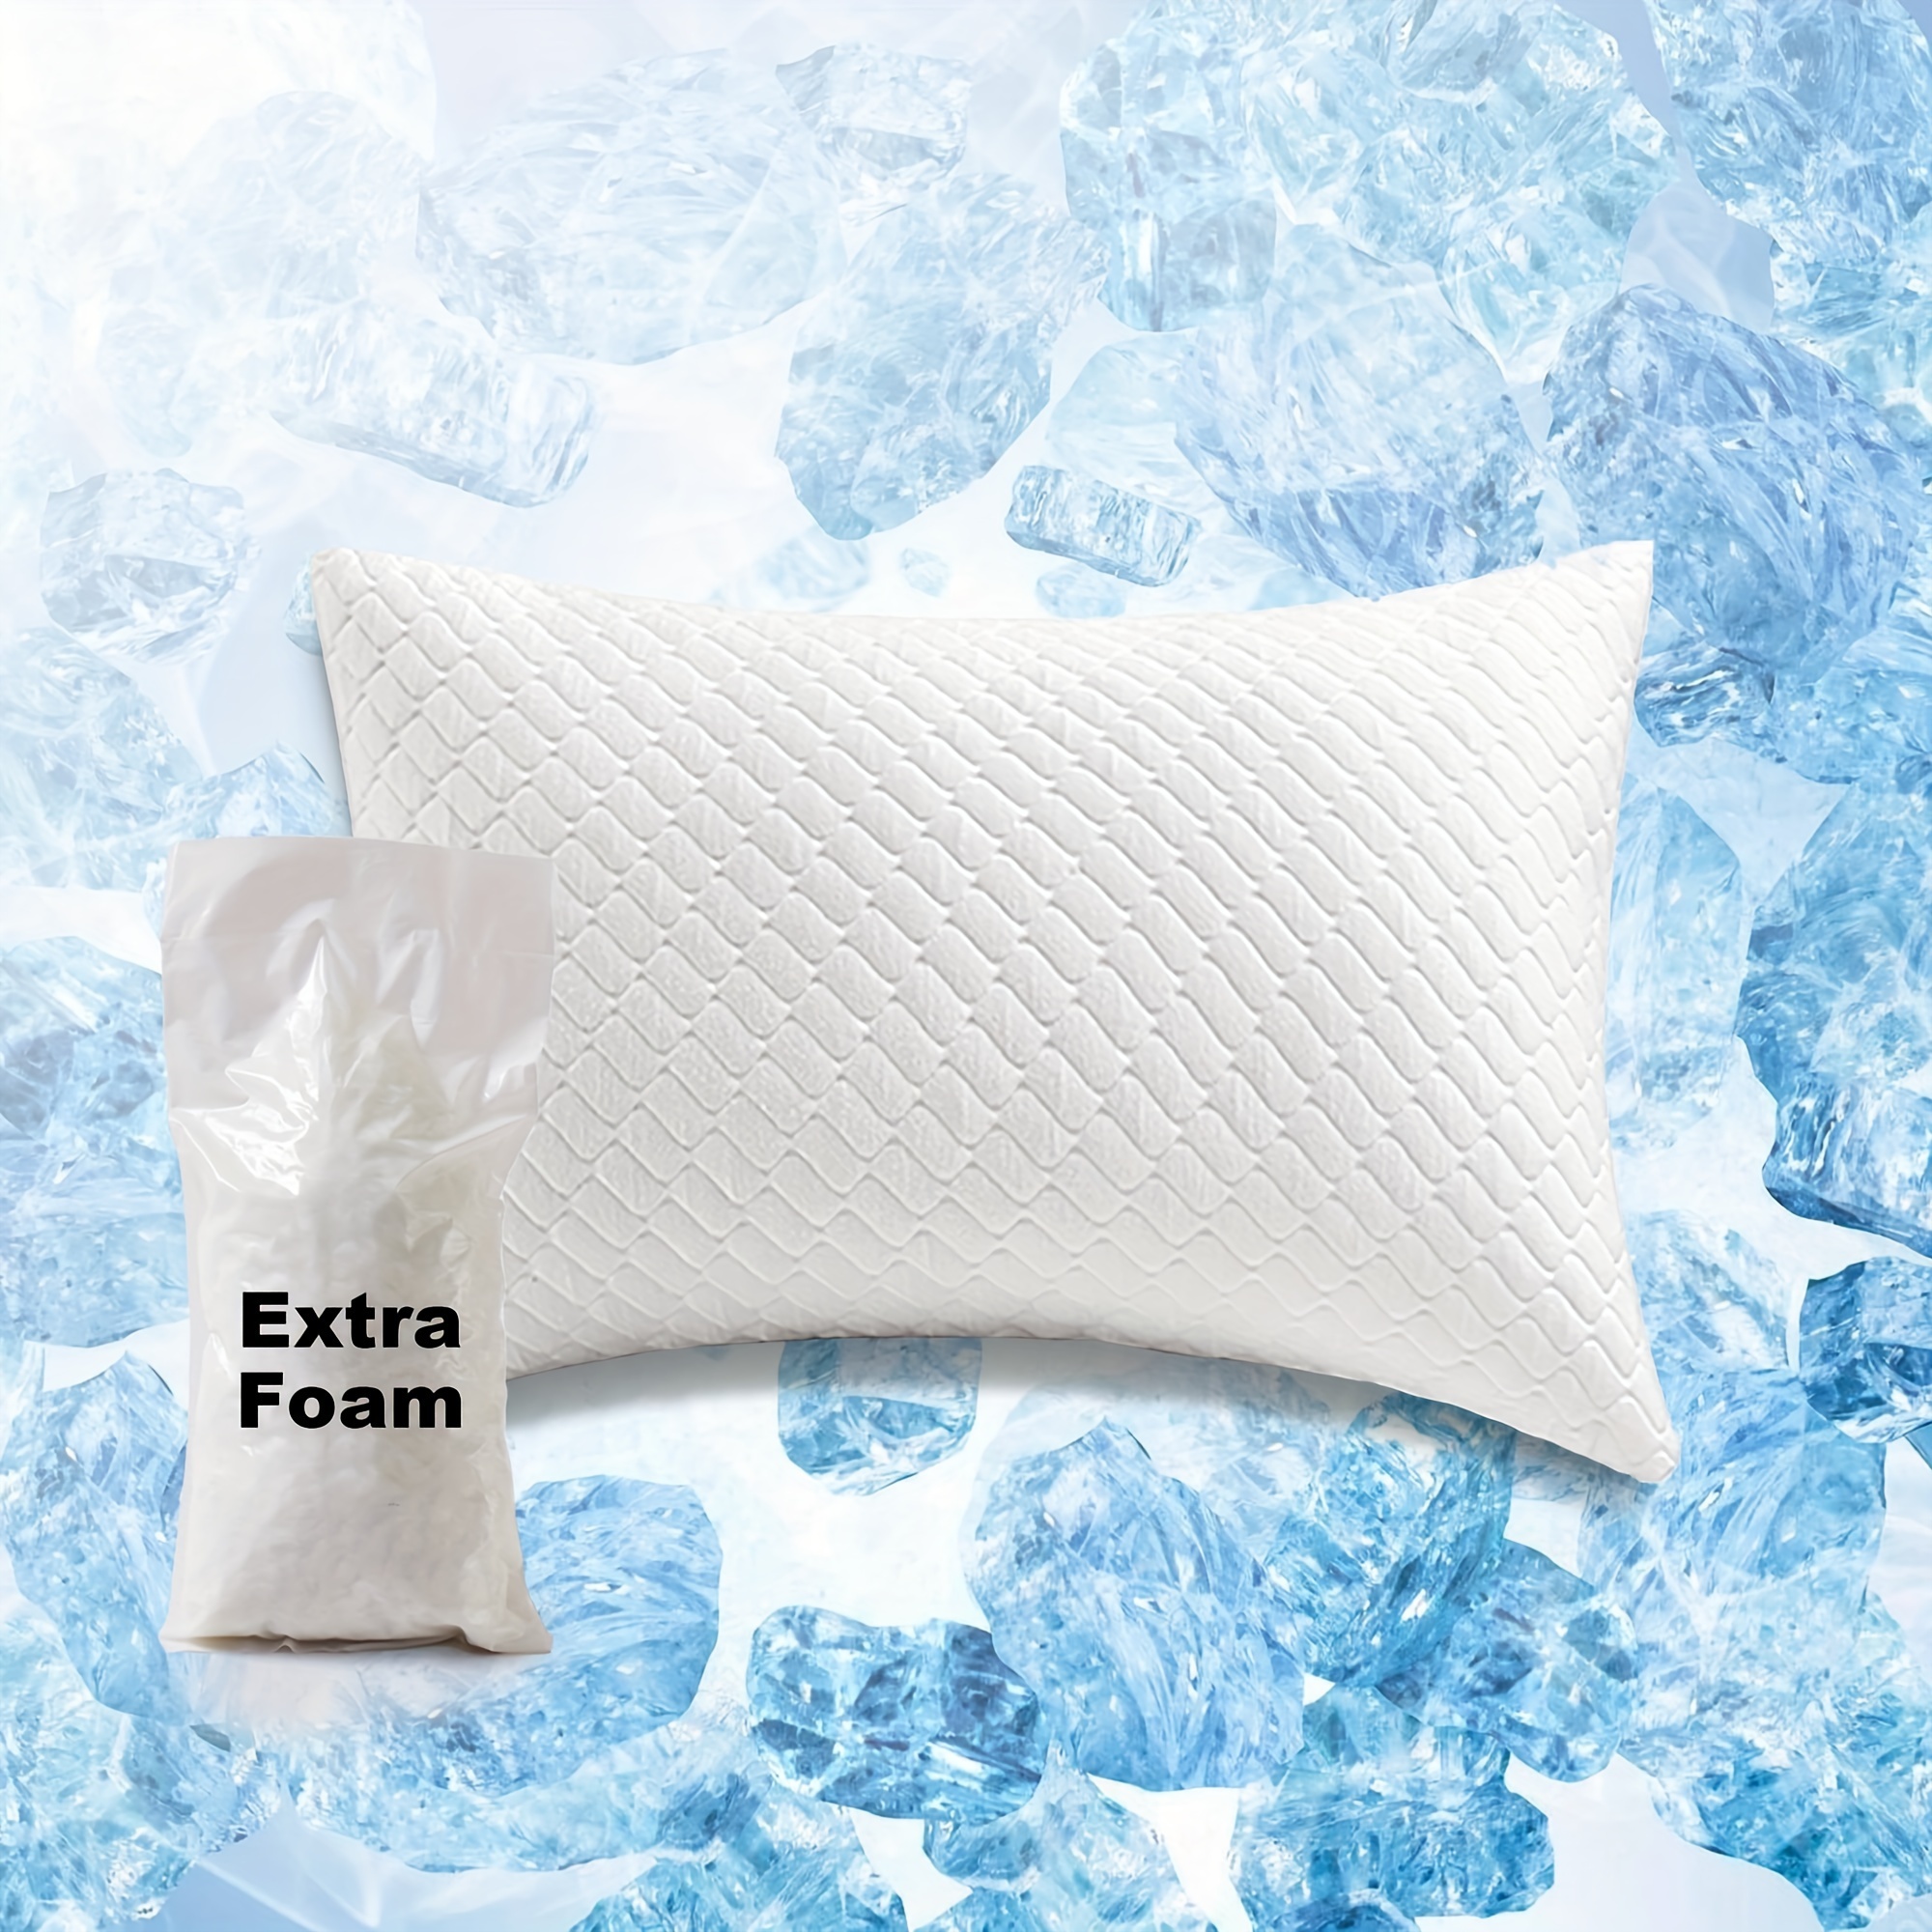 

1pcs Cooling Memory Foam Pillow King For Sleeping Adjustable Filling Bed Pillow Cooling Surface Viscose Derived From With Washable Pillowcase, Extra Filling Included